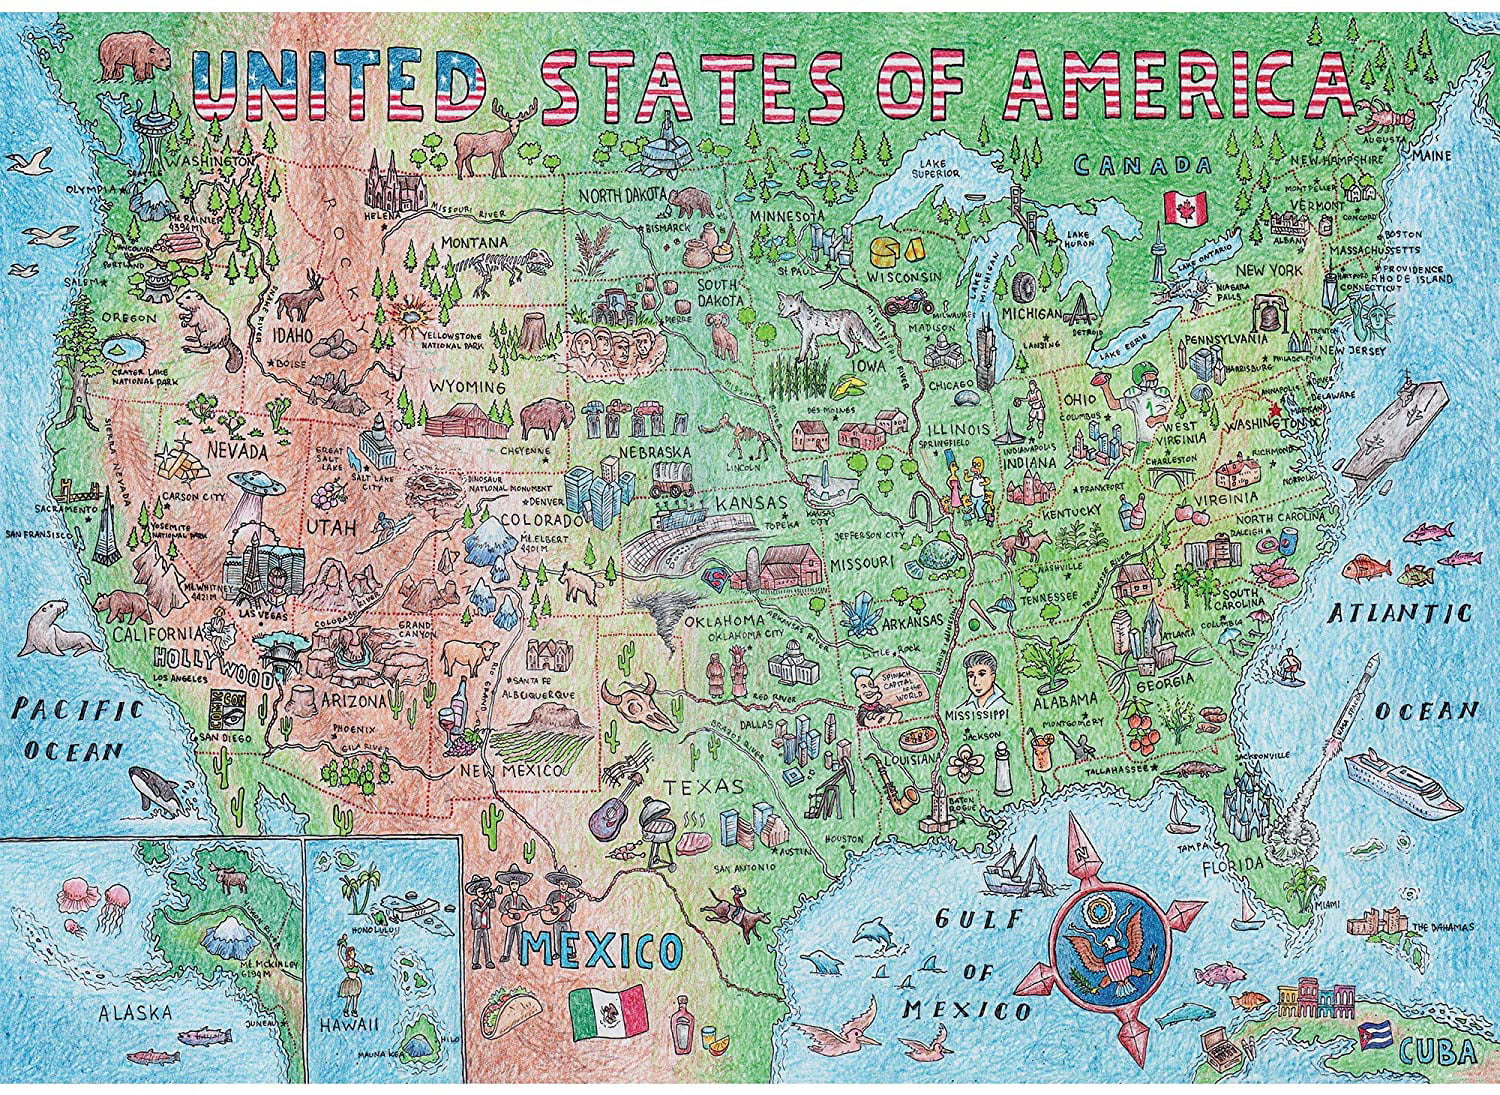 Difficult USA Map Puzzle 1000 Piece for Adults, United States of America, Patriotic Jigsaw Puzzle & Bonus Fact Poster by Ottoy, Premium Materials, 27.5 x 19.7 in